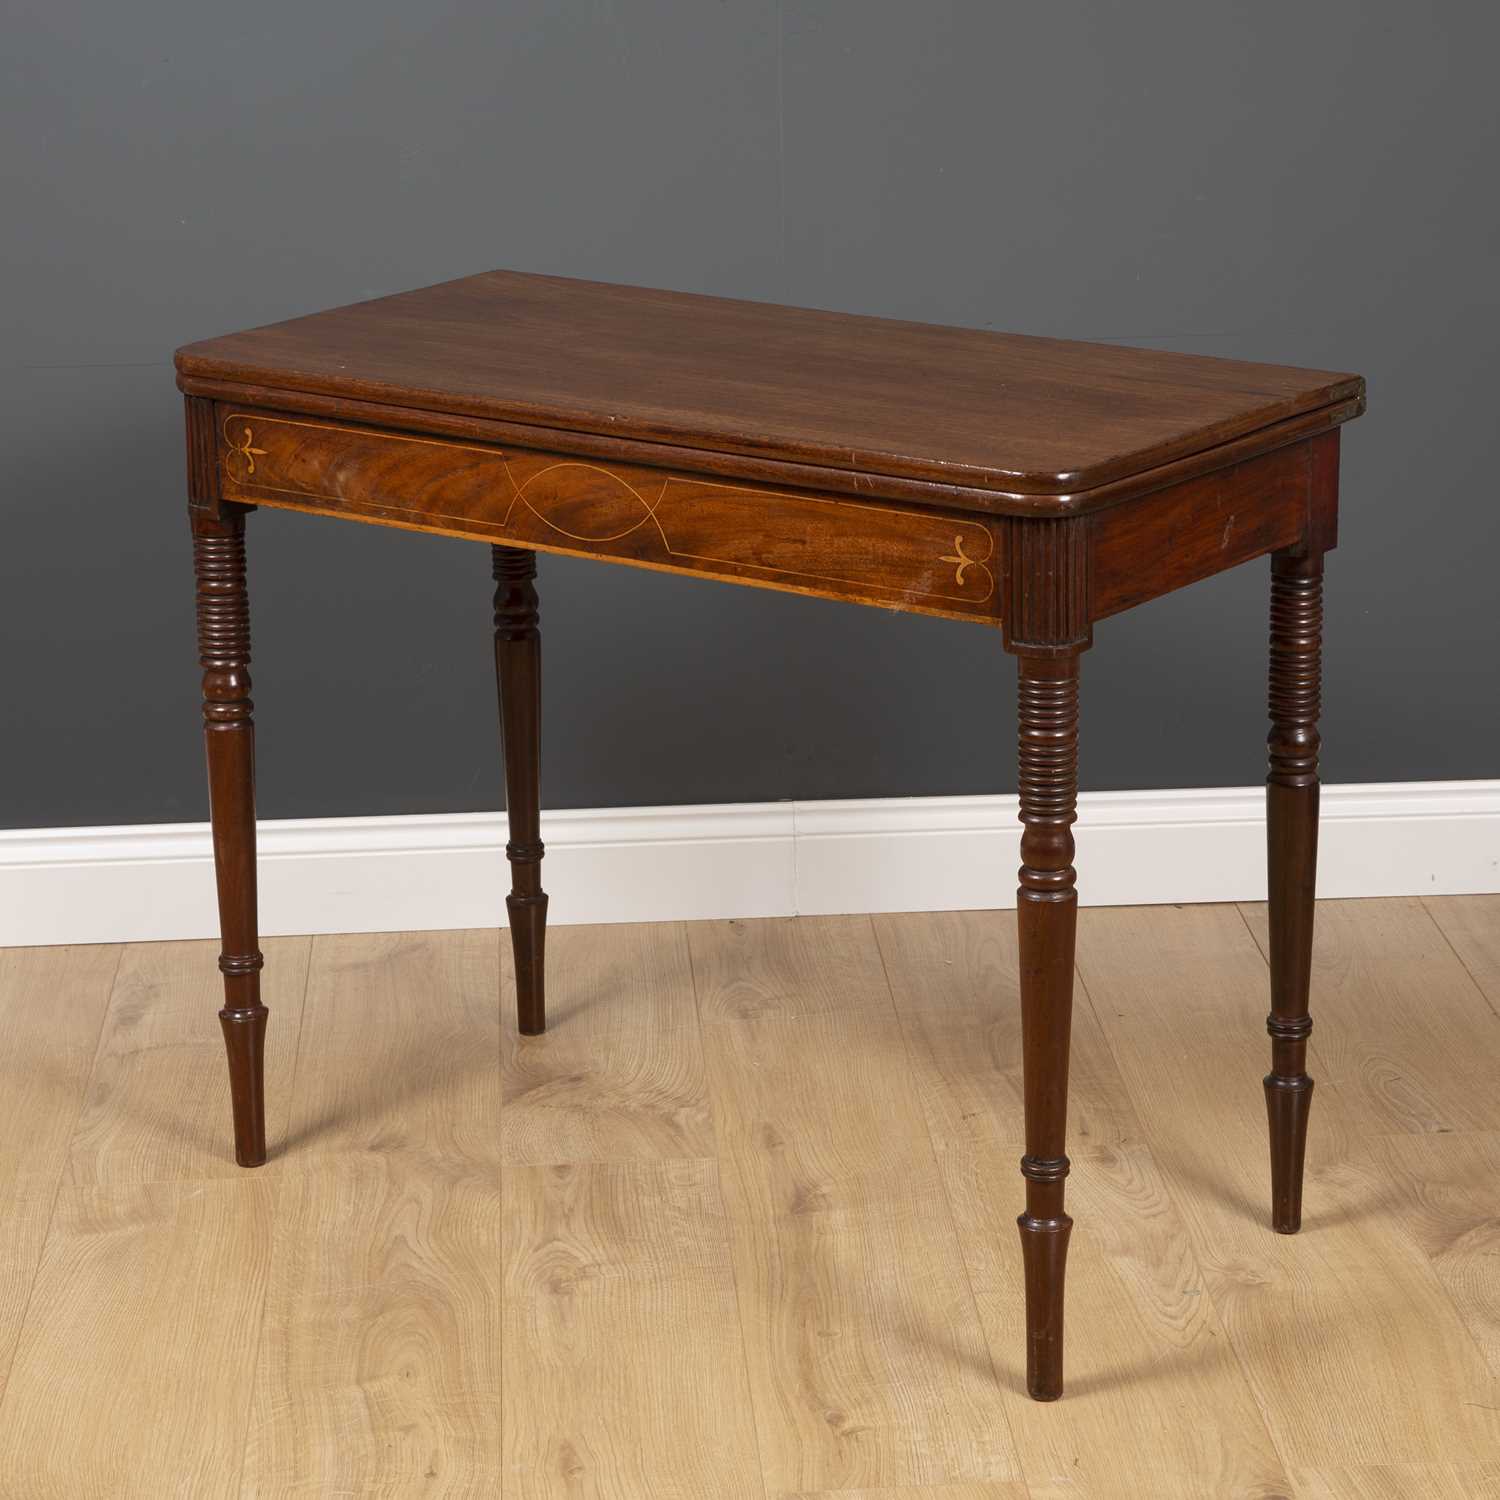 A George III fold over tea table with ring turned tapering legs and decorative inlay to the frieze - Image 2 of 5